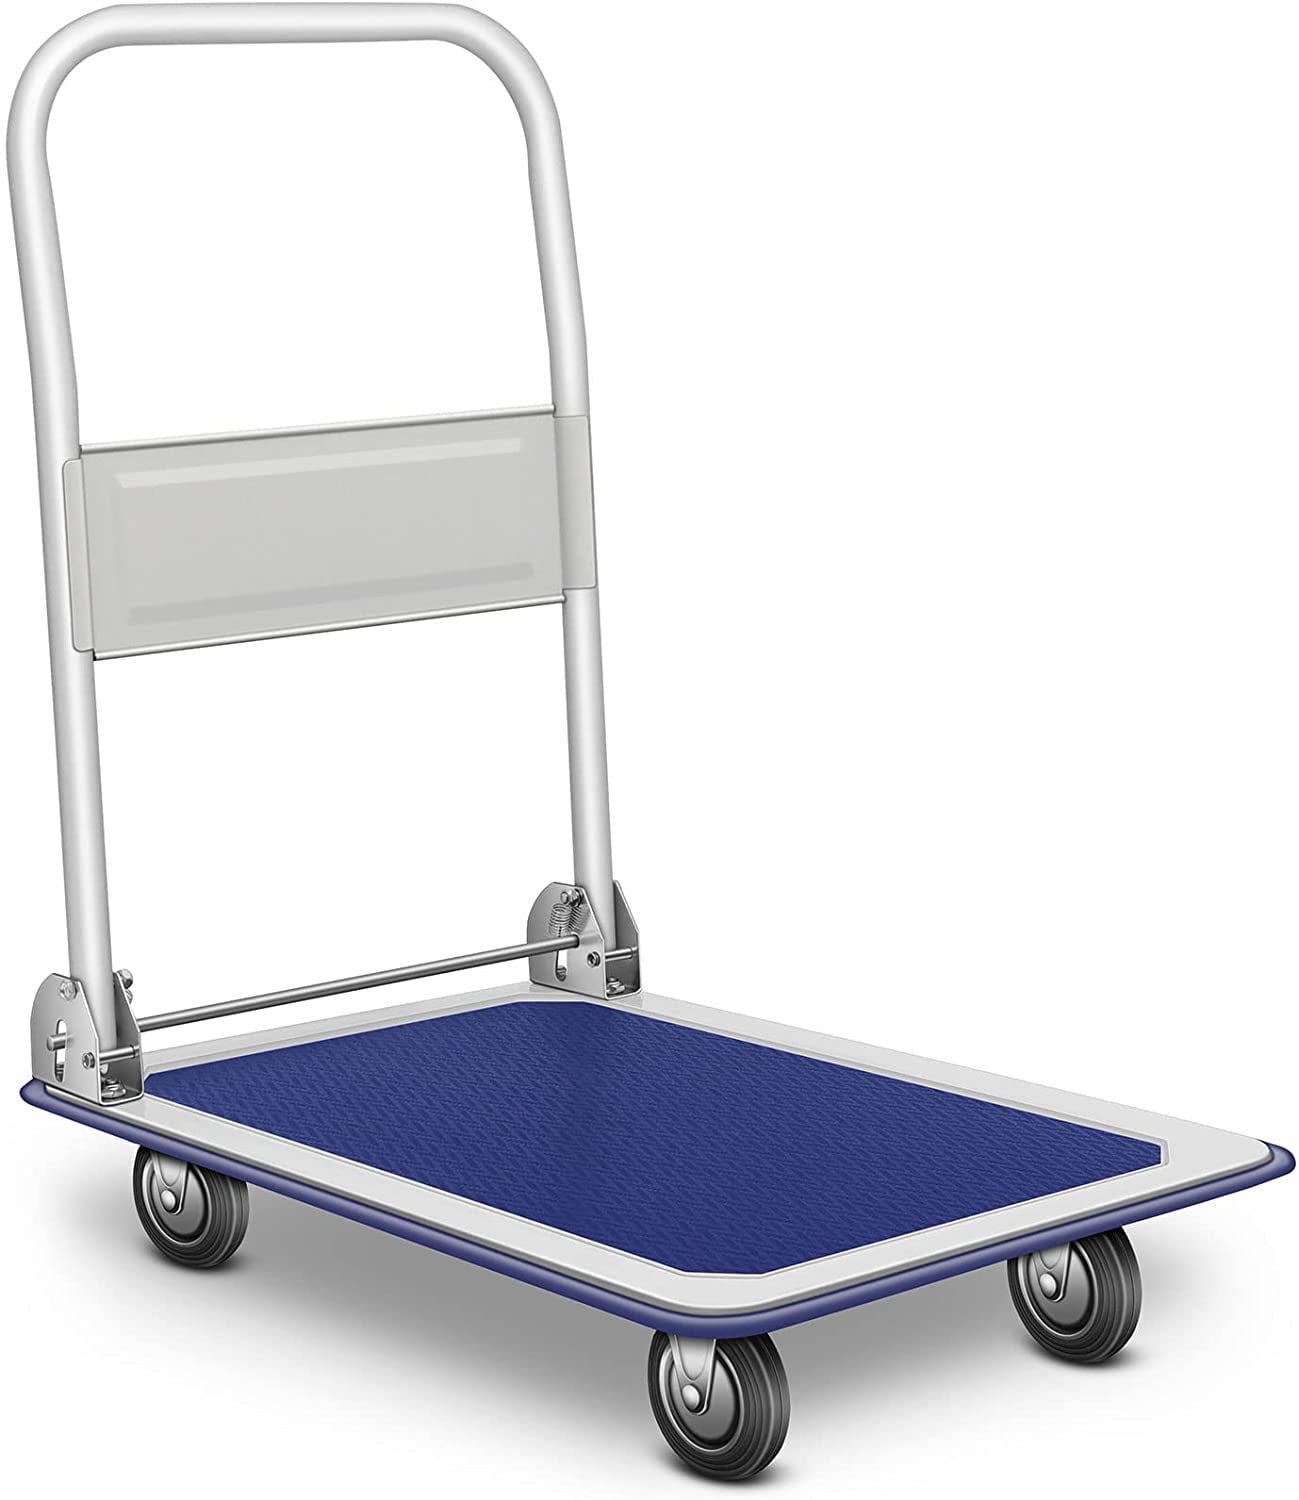 330lb Platform Cart Dolly Folding Moving Luggage Flatbed Cart Hand Truck Trolley 